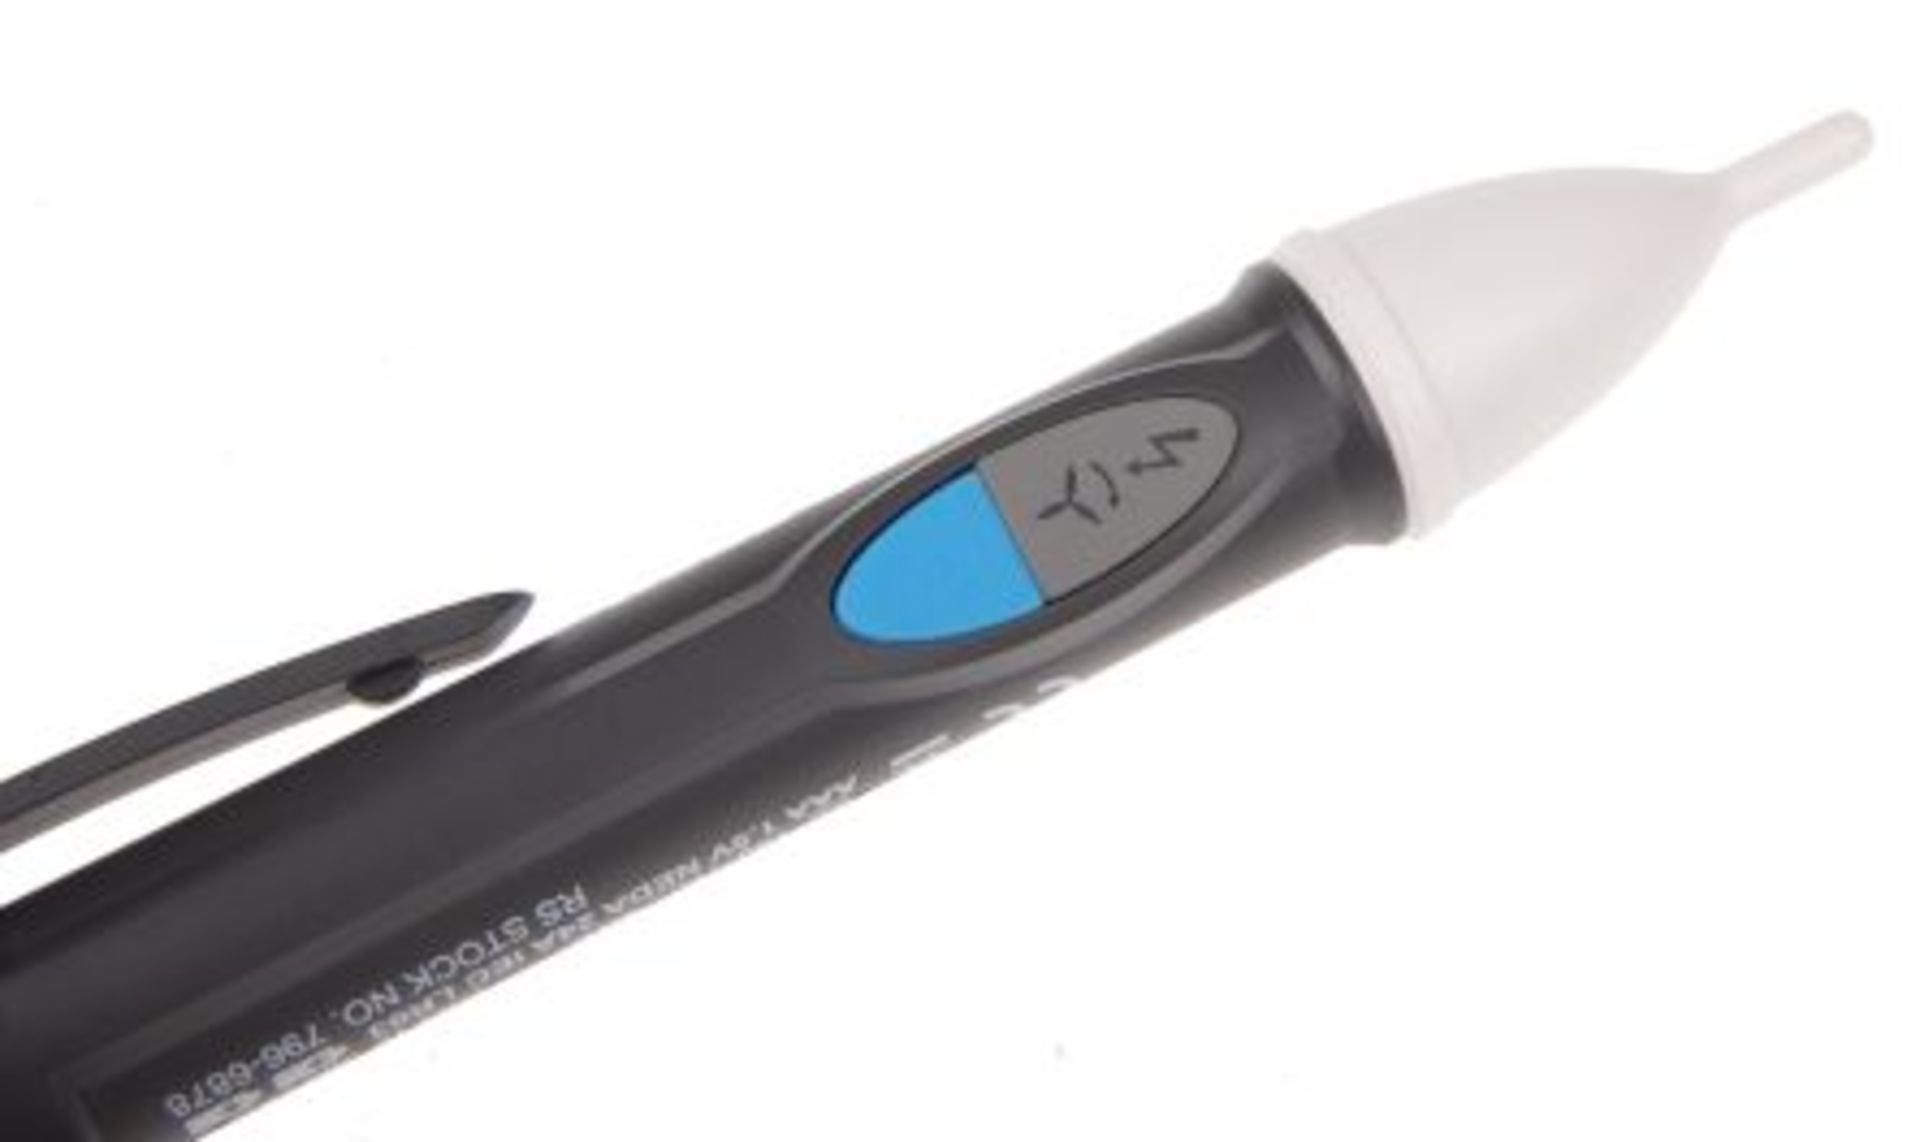 ISO-TECH IVP-2 Non Contact Voltage Detector, 100V ac to 1000V ac - Image 2 of 2